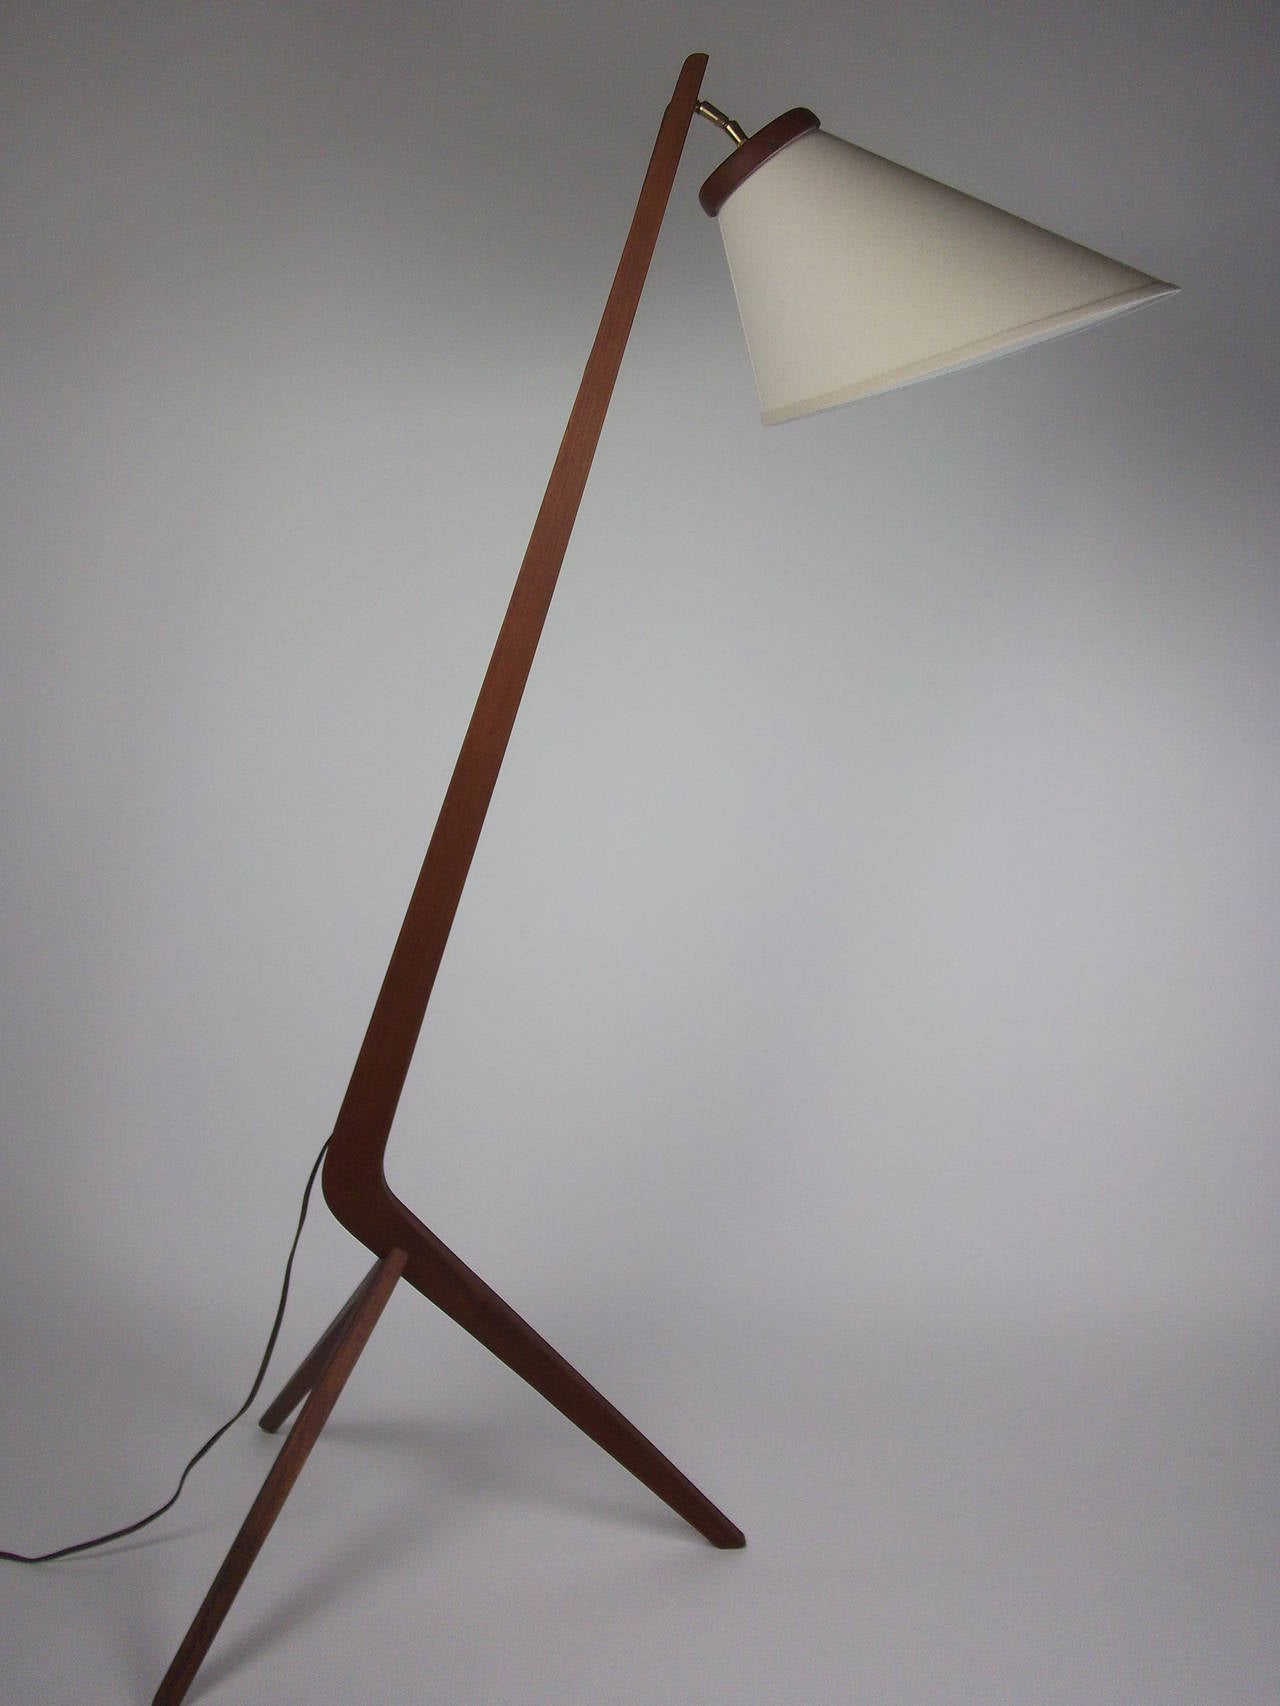 Striking 1960's teak floor lamp  come with a new custom shade made from the original.  Outstanding condition with one small crack on the front leg, barely noticeable and does not affect it structurally, but wanted to mention